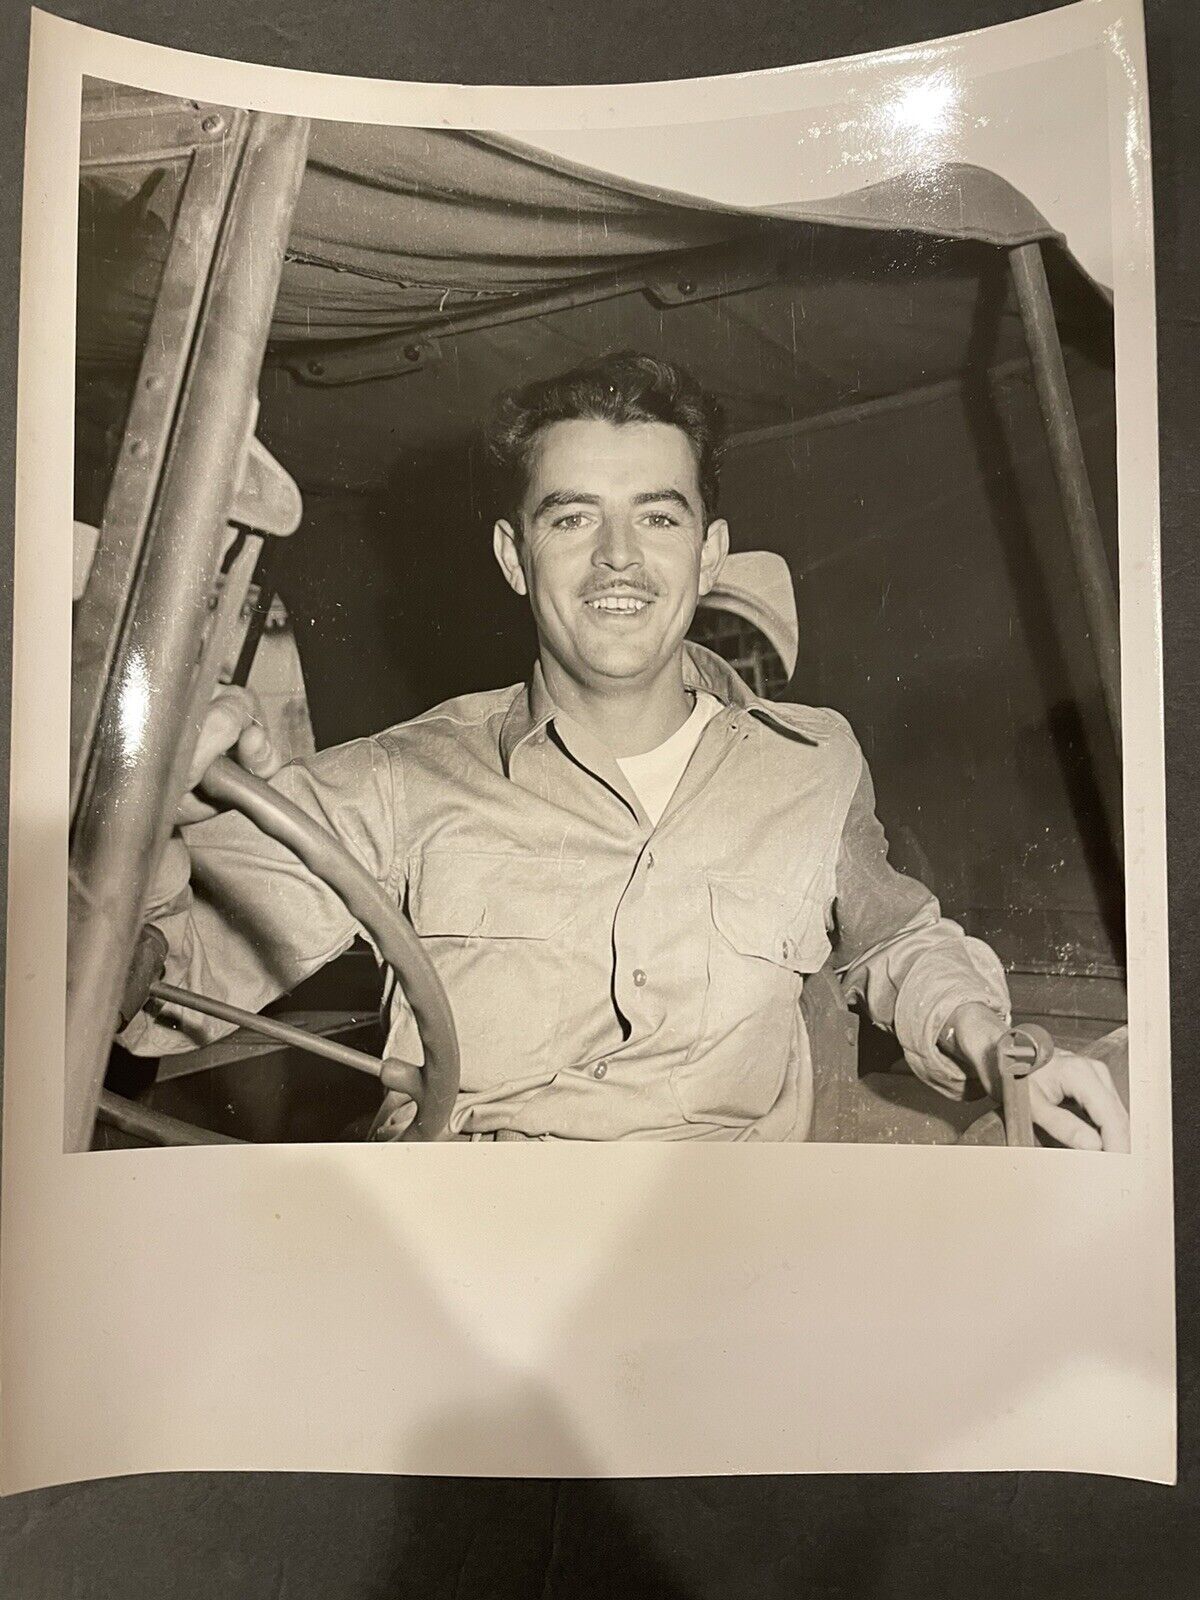 WWII Jeep interview, 32nd infantry division, yank press photo, G503 Philippines